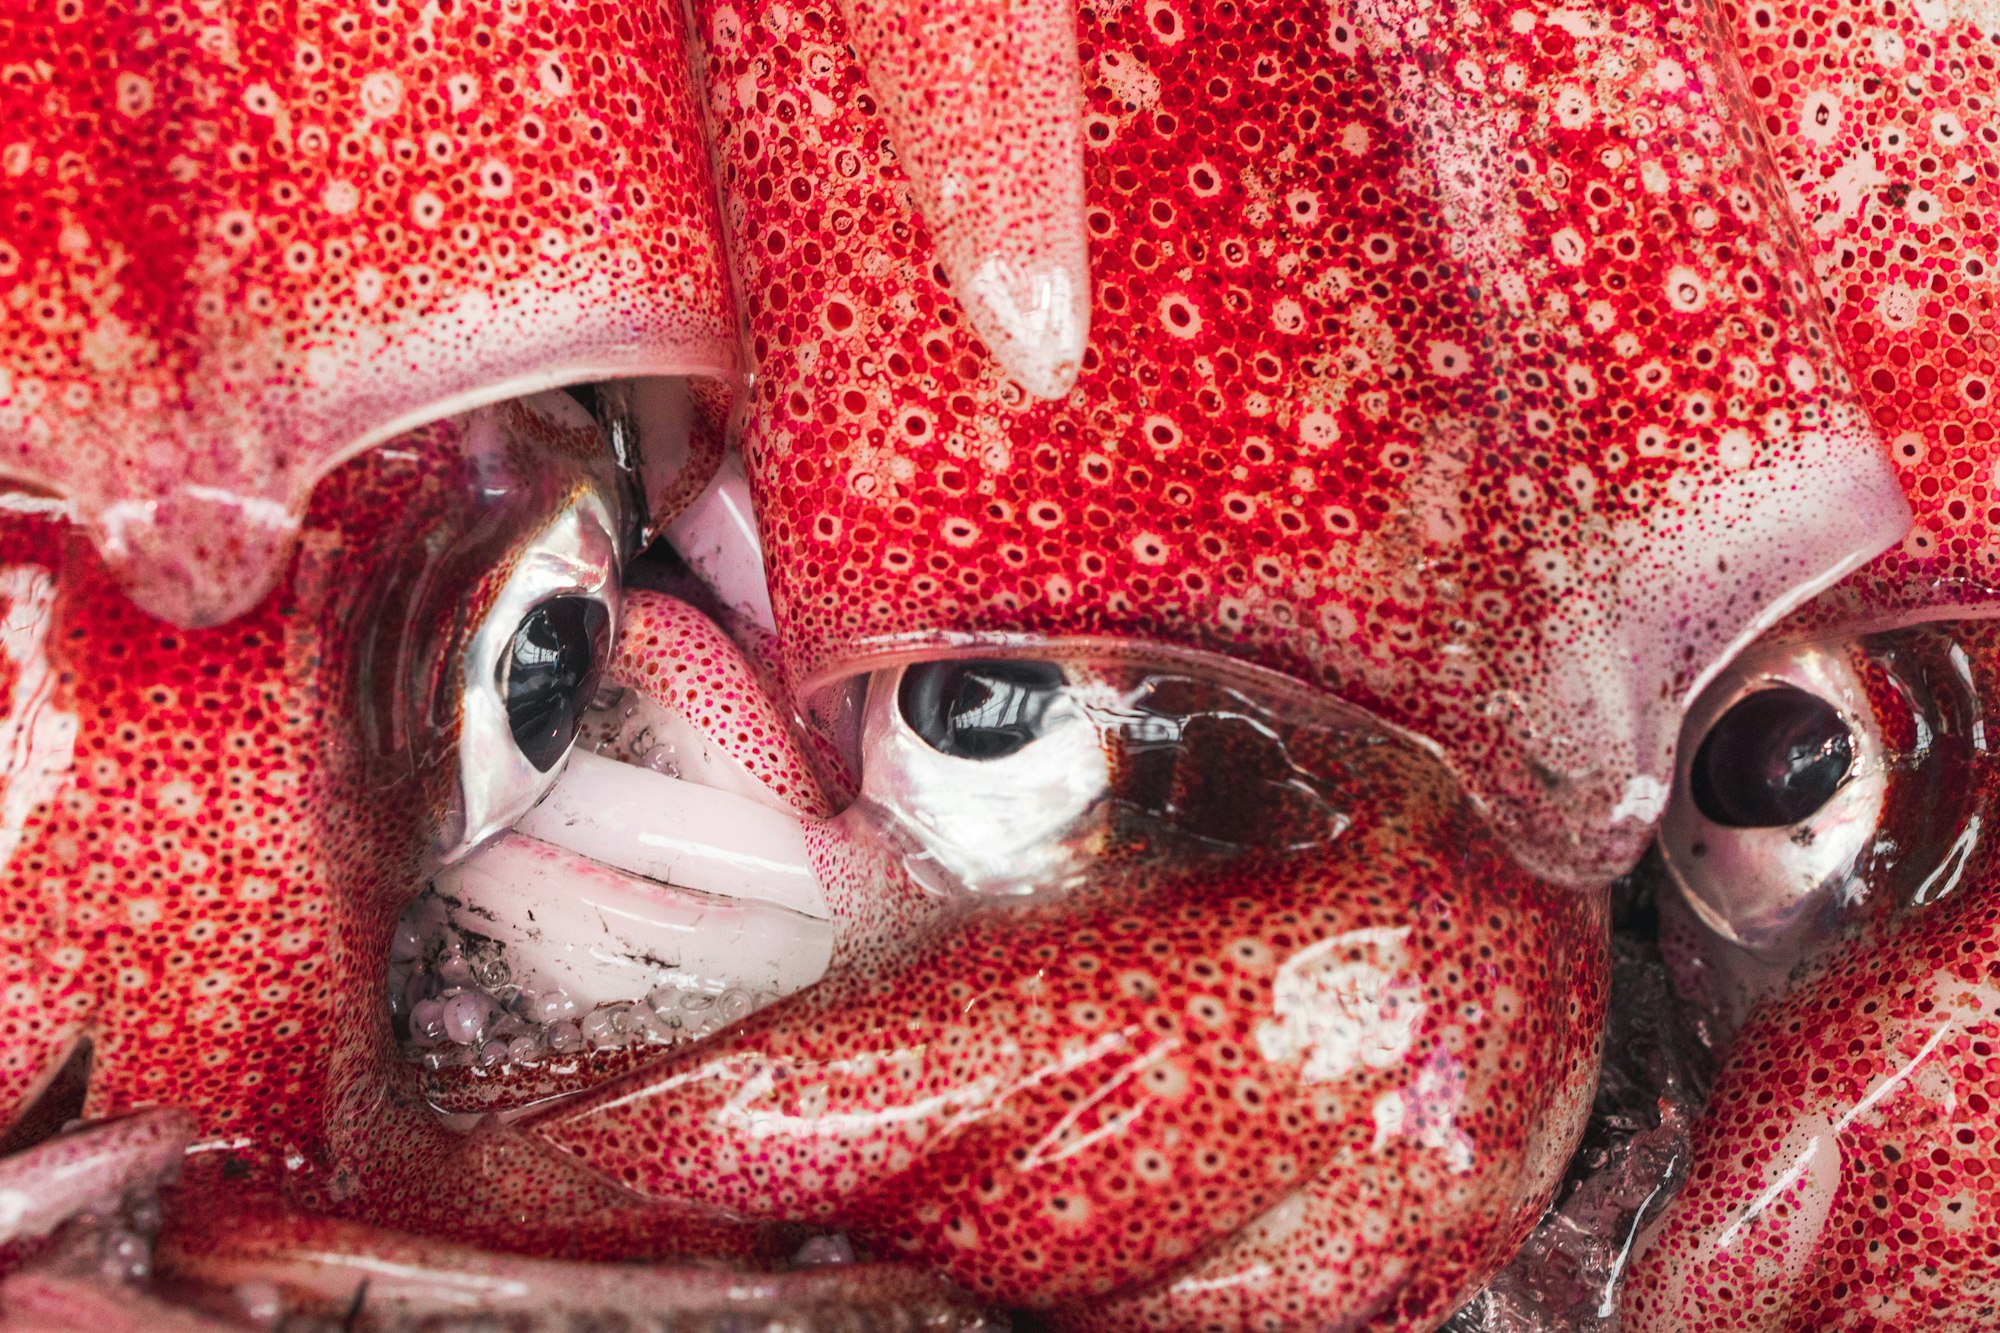 a close-up of the reddish-orange, mottled heads of several squid, with their eyes visible